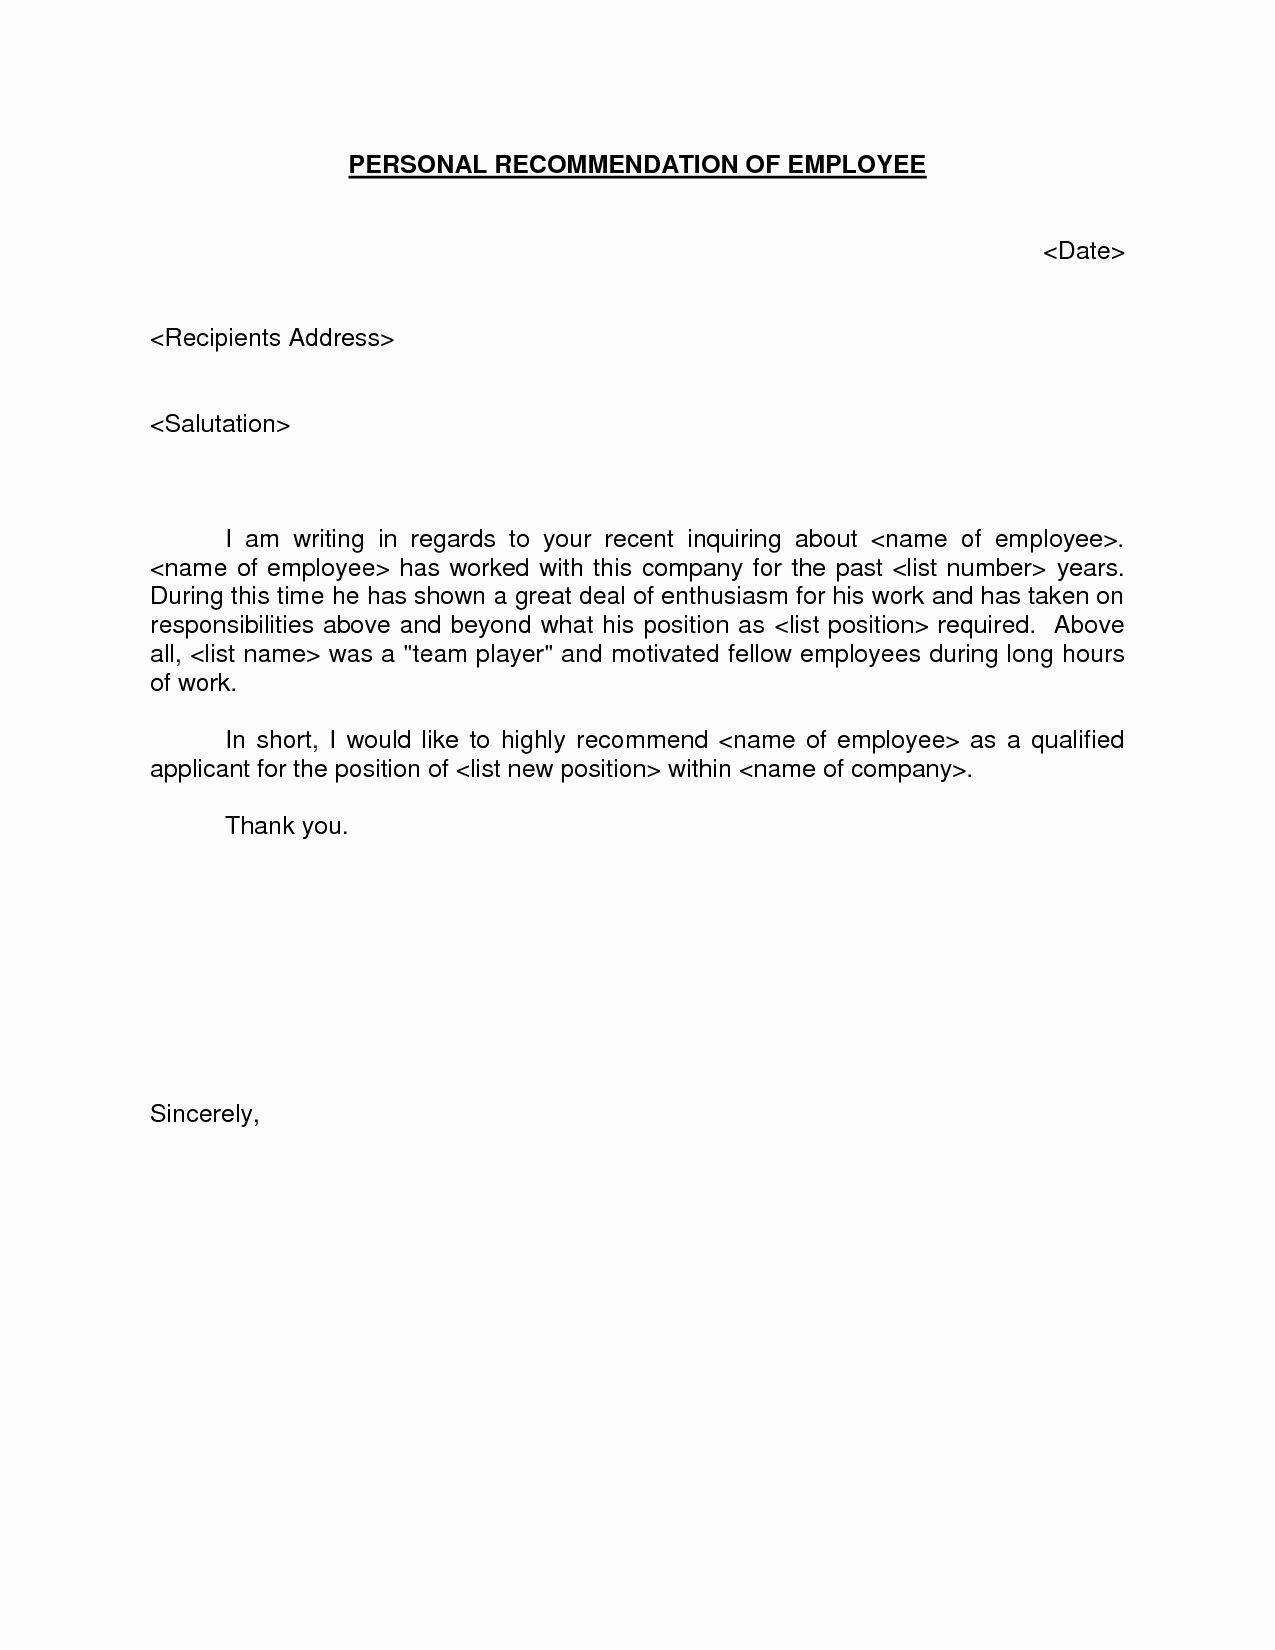 Reference Letter for Employment Template Unique Personal Re Mendation Of Employee Request Letter Sample